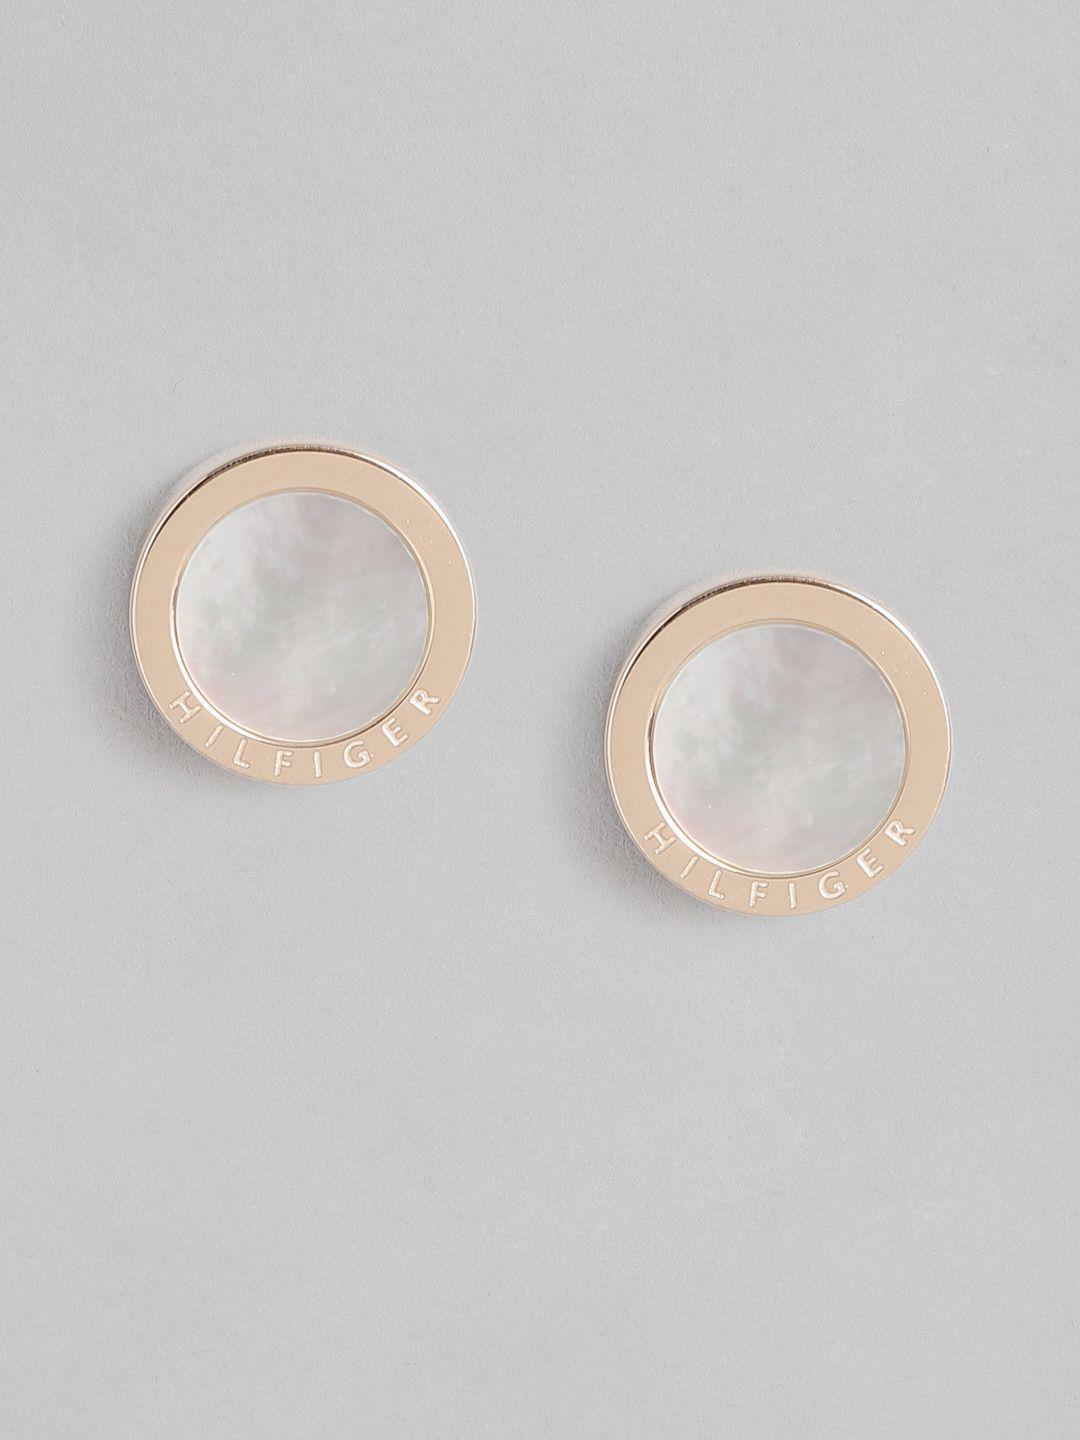 tommy-hilfiger-iconic-circular-stud-earrings